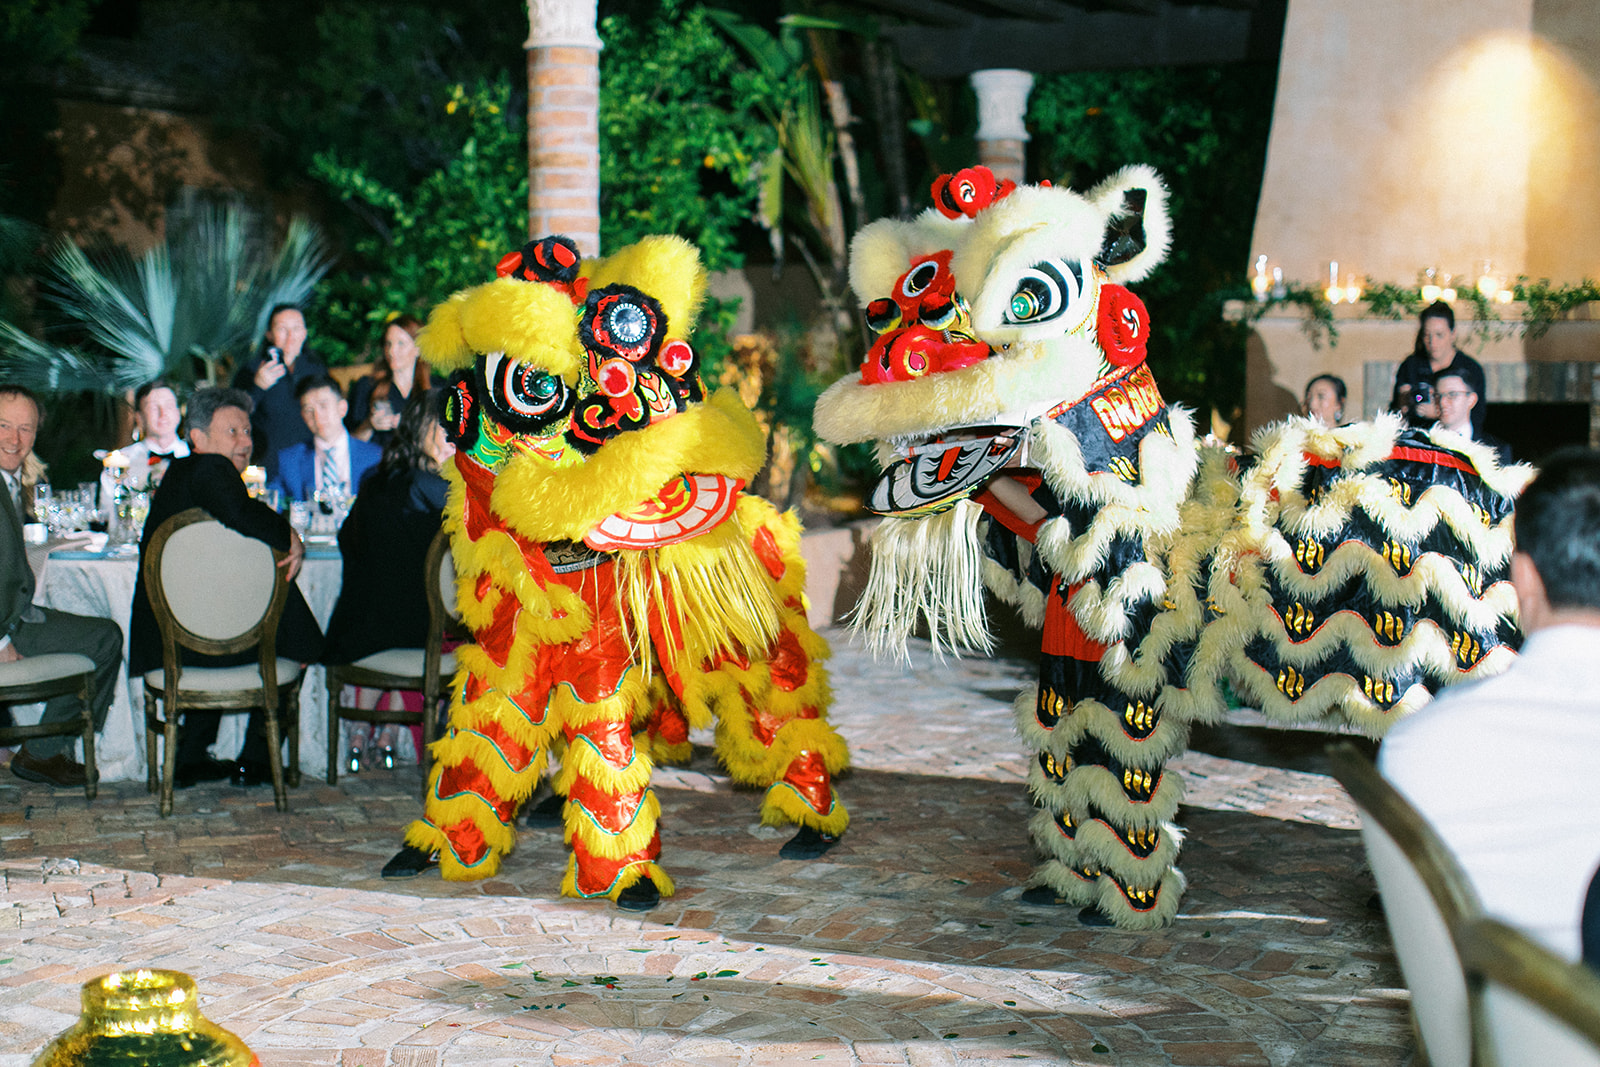 Chinese lion dance at wedding reception.